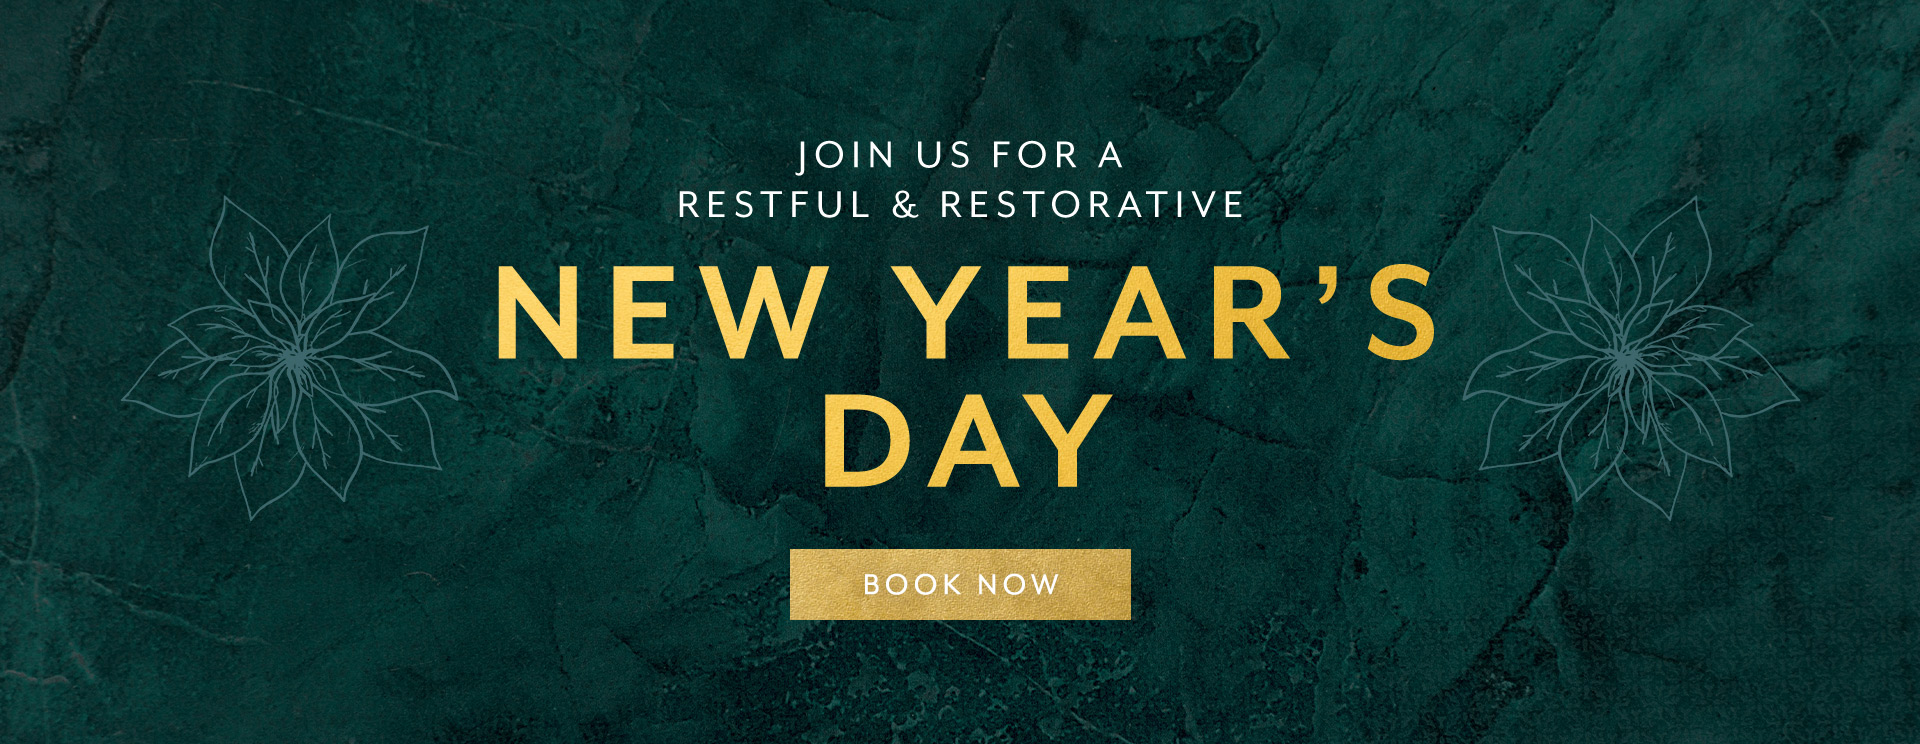 New Year's Day at The Lyttelton Arms